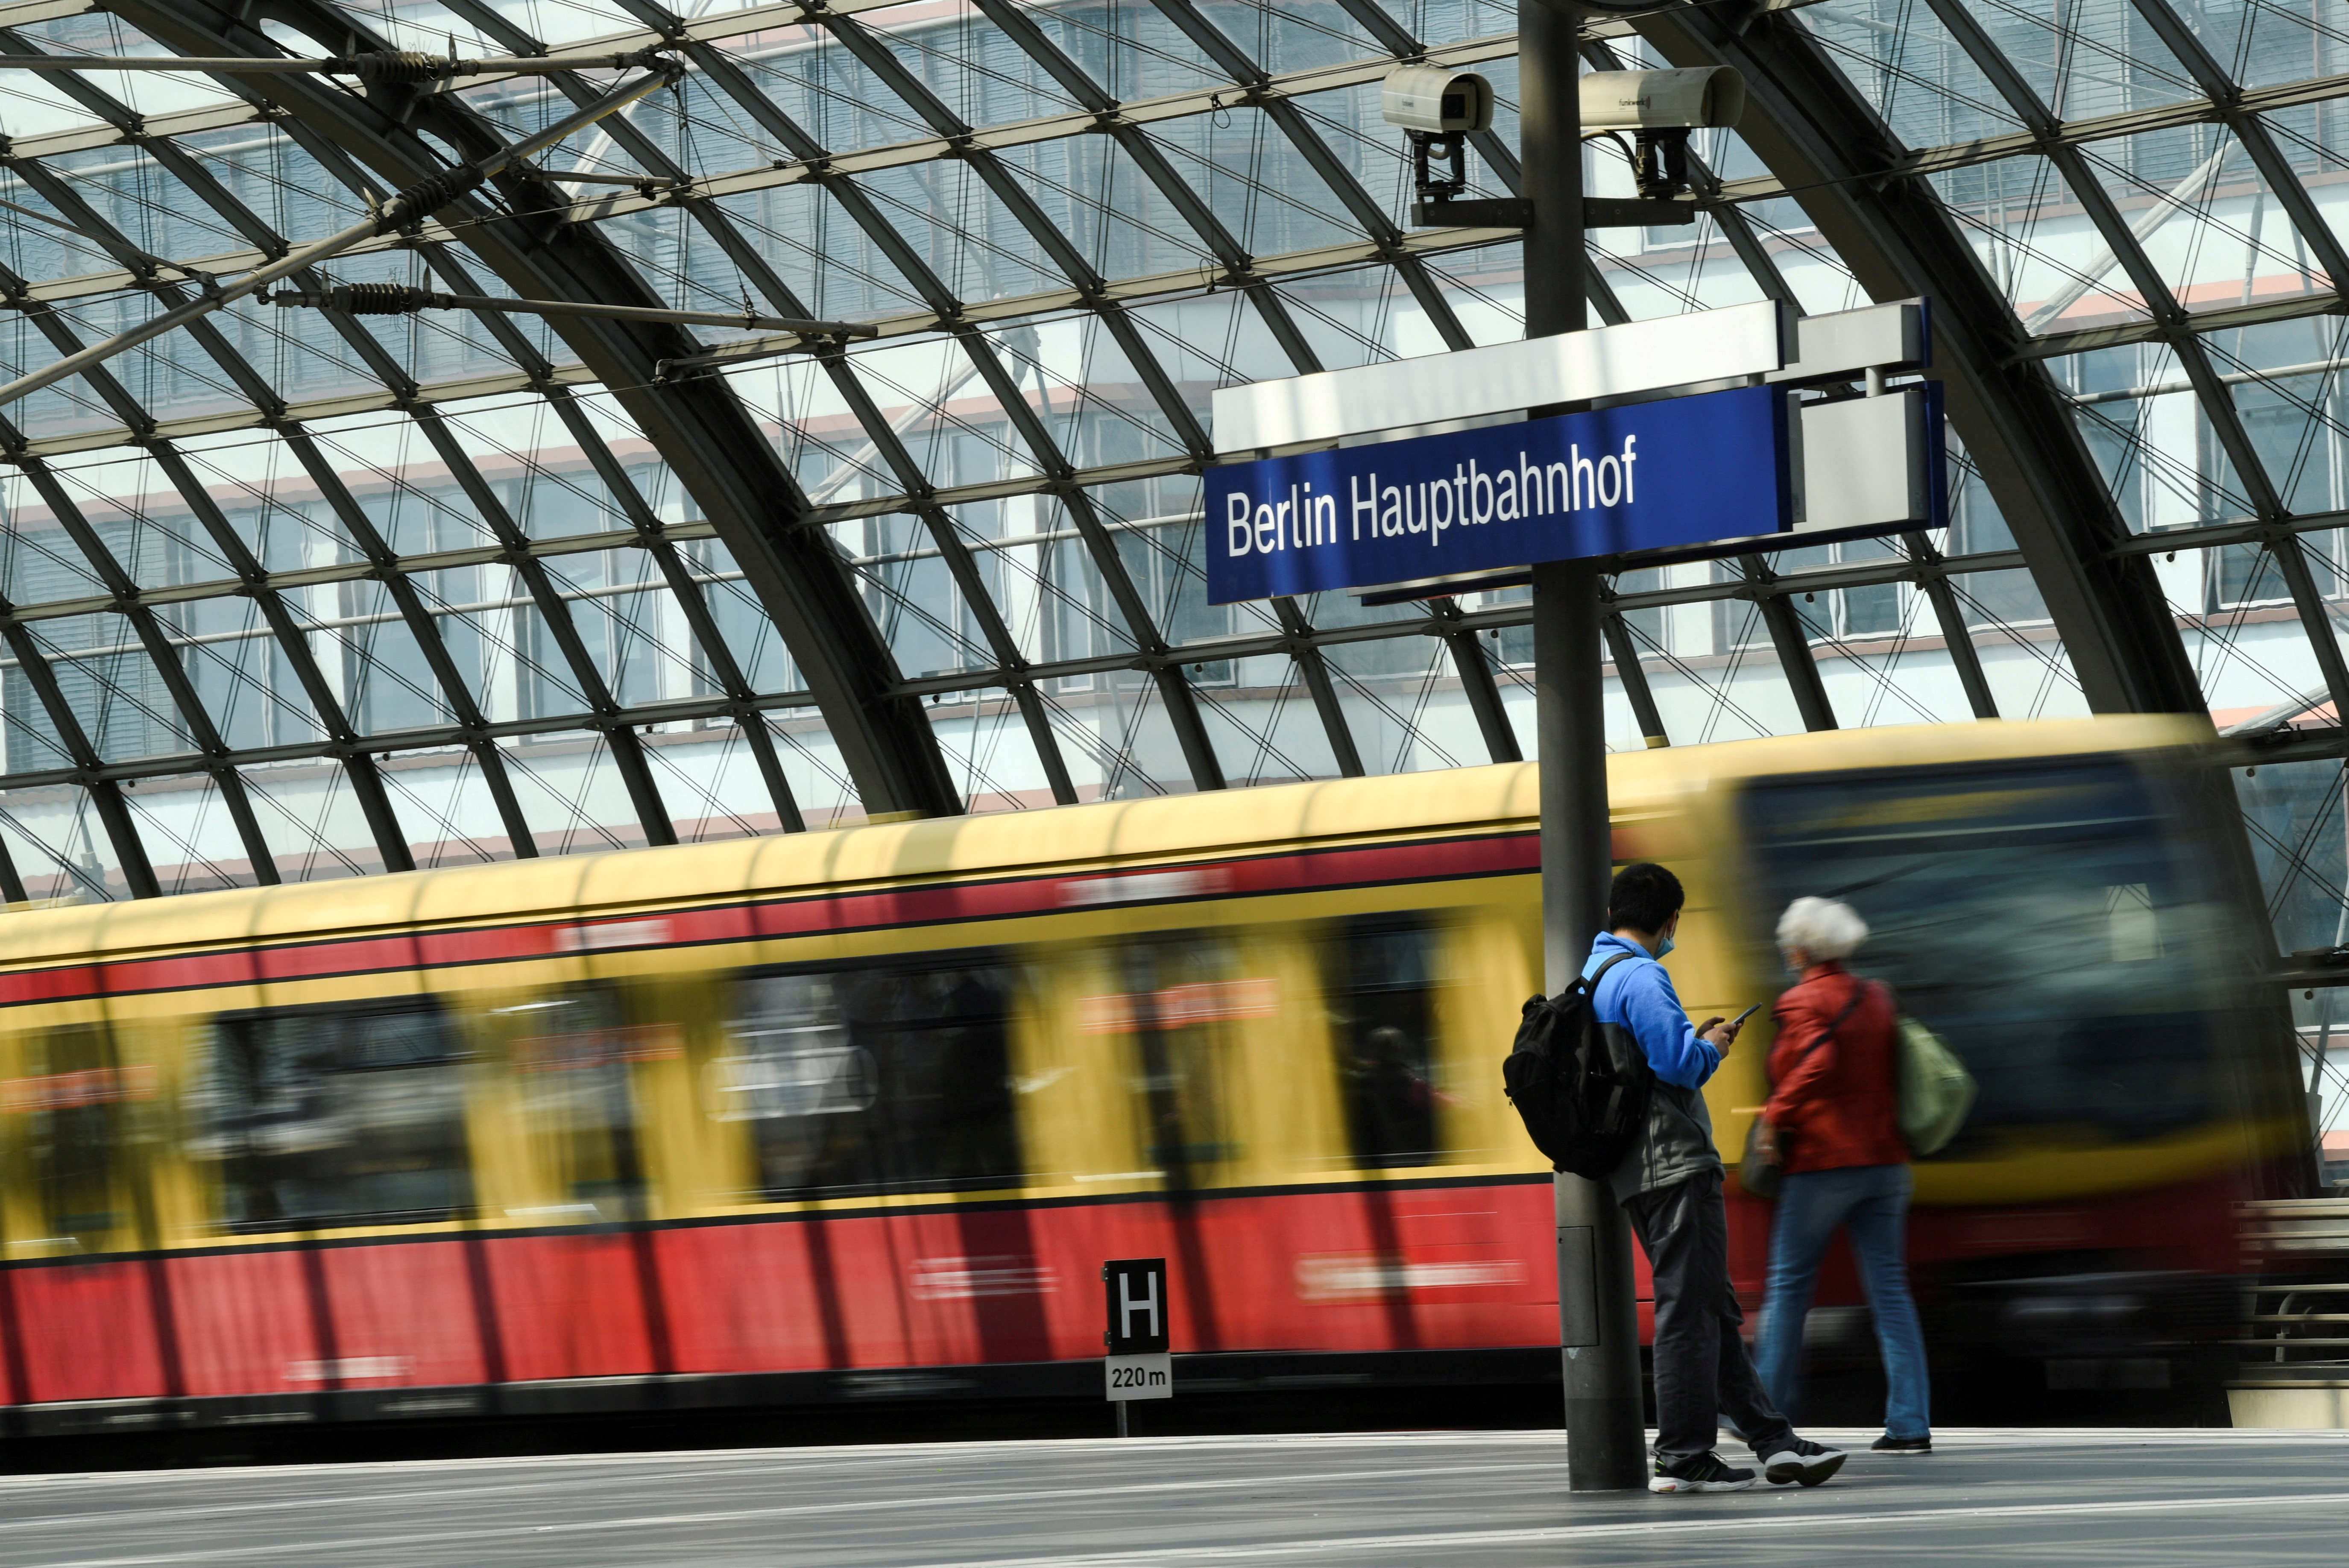 Public transport operators offer special nine-euro-ticket to be used nationwide for a month